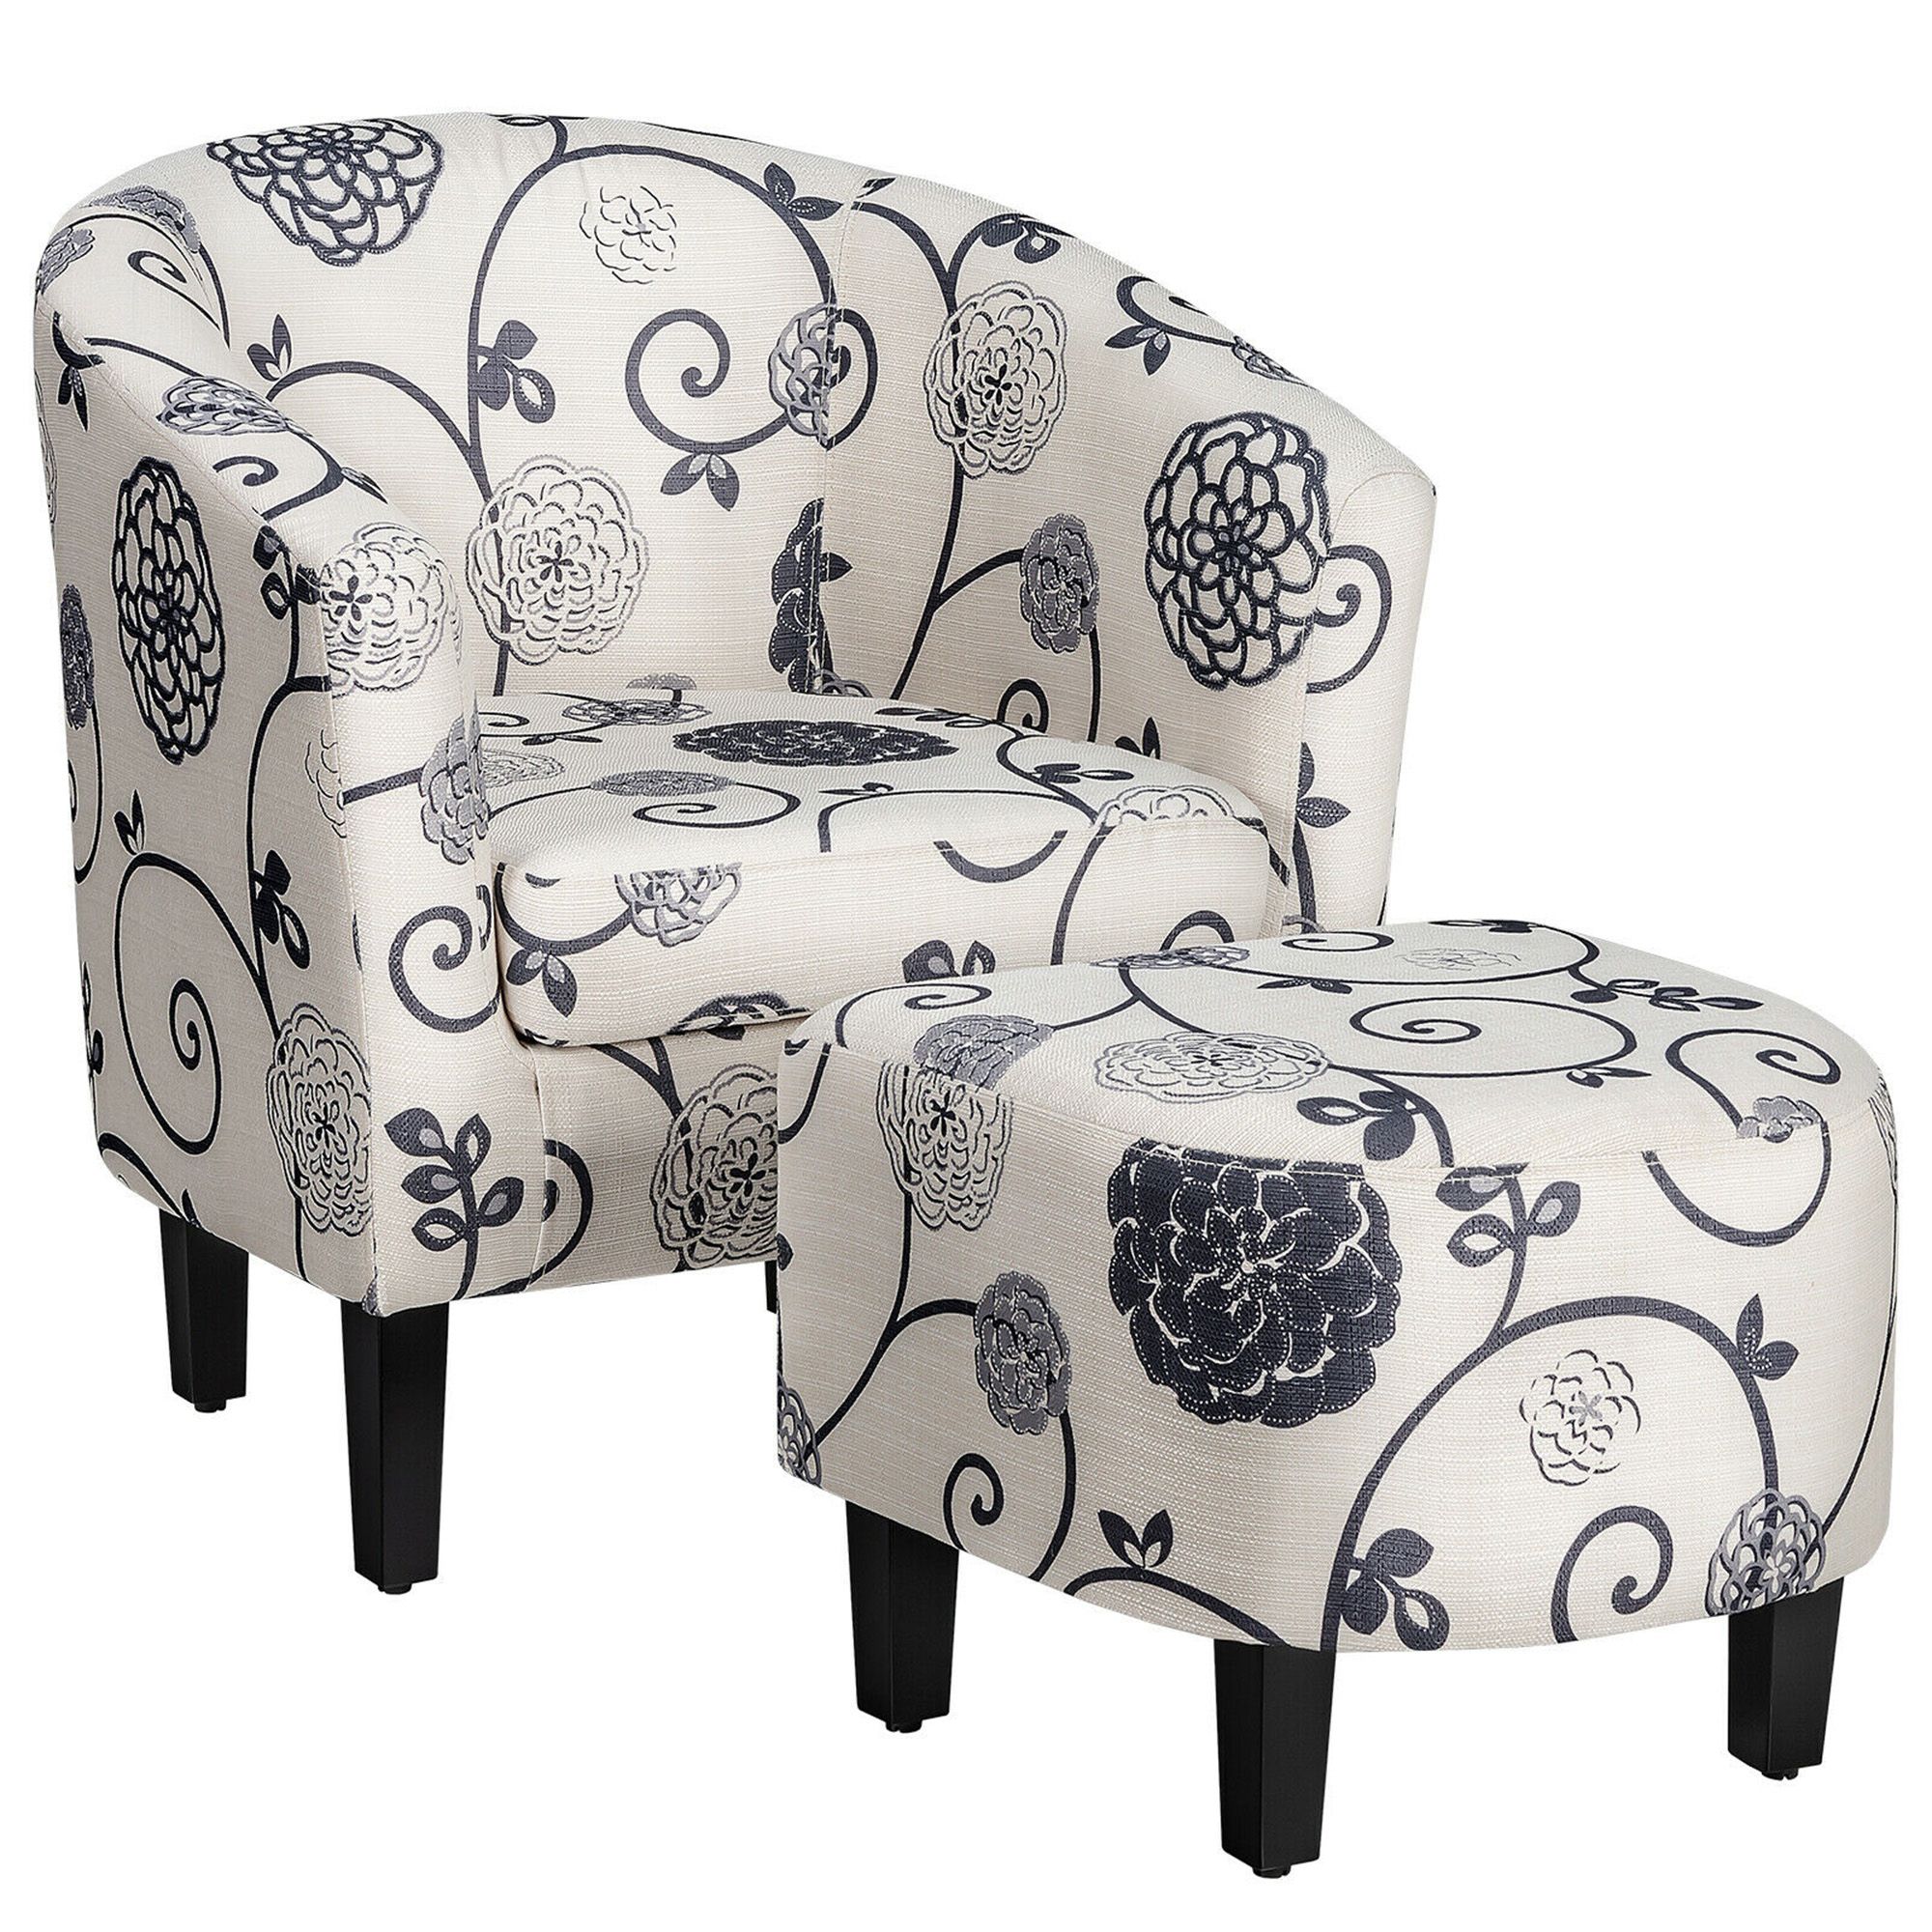 Gymax Modern Accent Tub Chair&ottoman Set Fabric Upholstered Club Chair With Regard To White Textured Round Accent Stools (View 11 of 20)